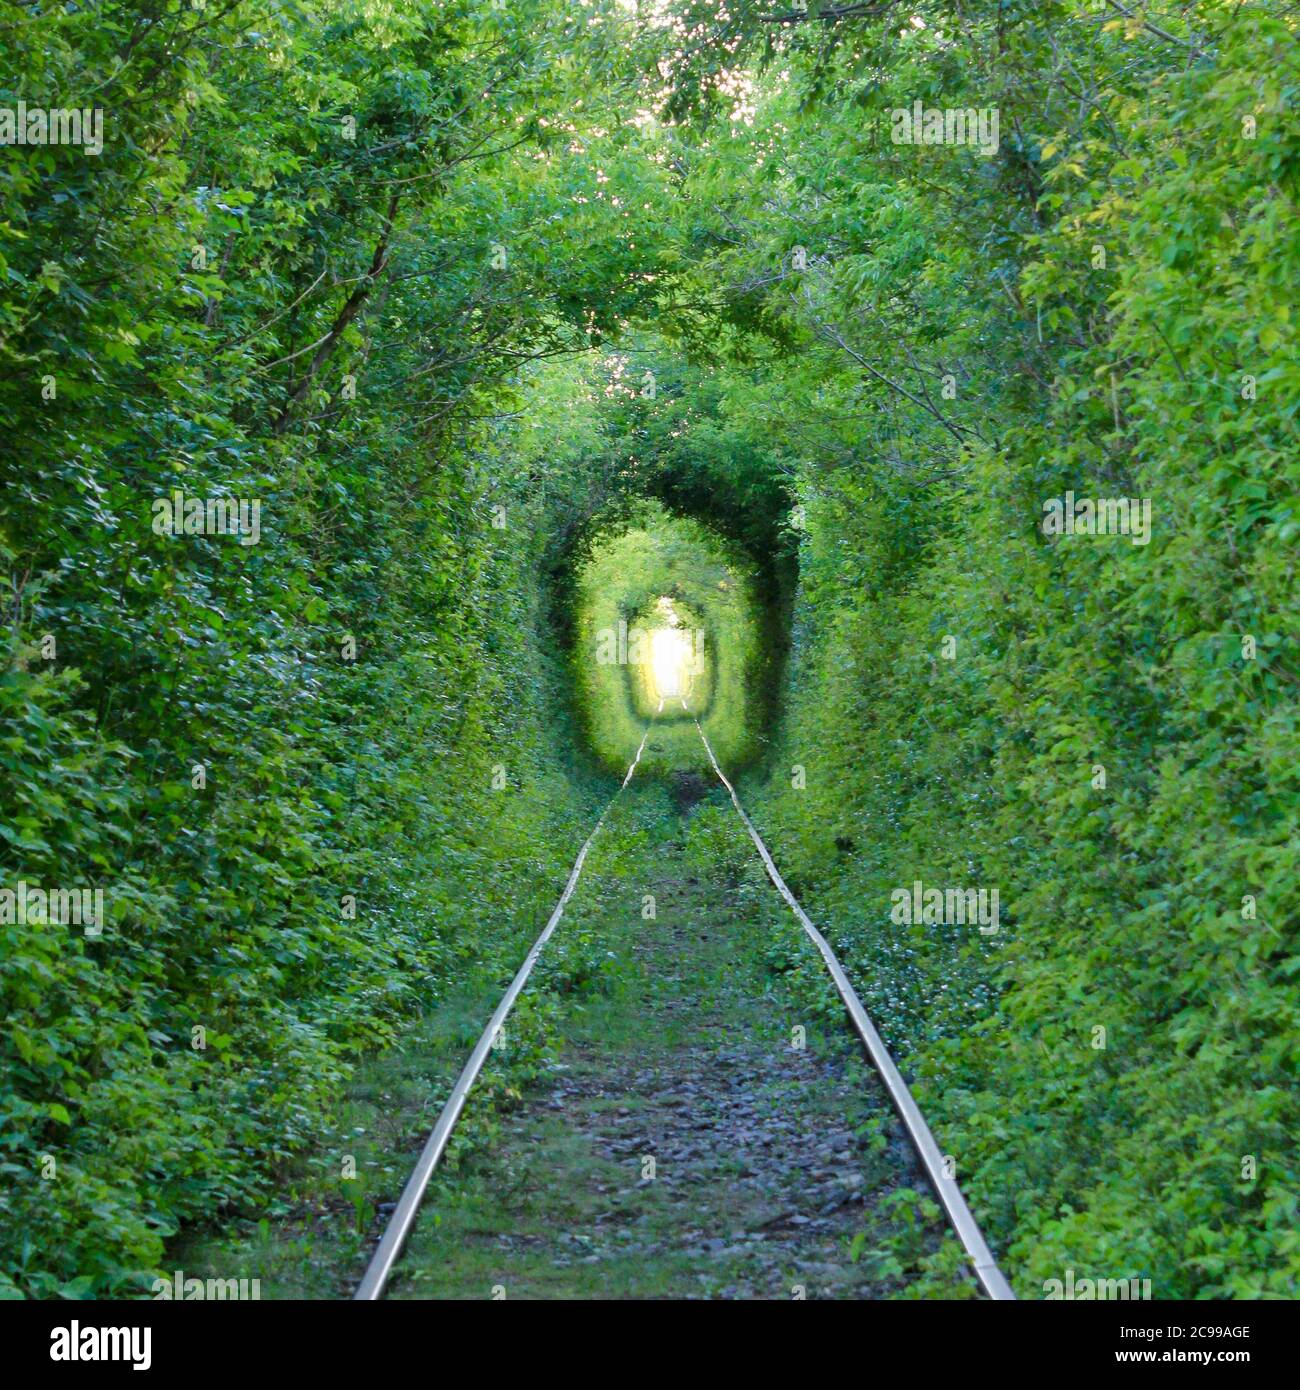 The Tunnel of Love. Wonders of nature. A natural arch formed by intertwined trees above a railway. Arch of Green tunnel of trees in the forest Stock Photo